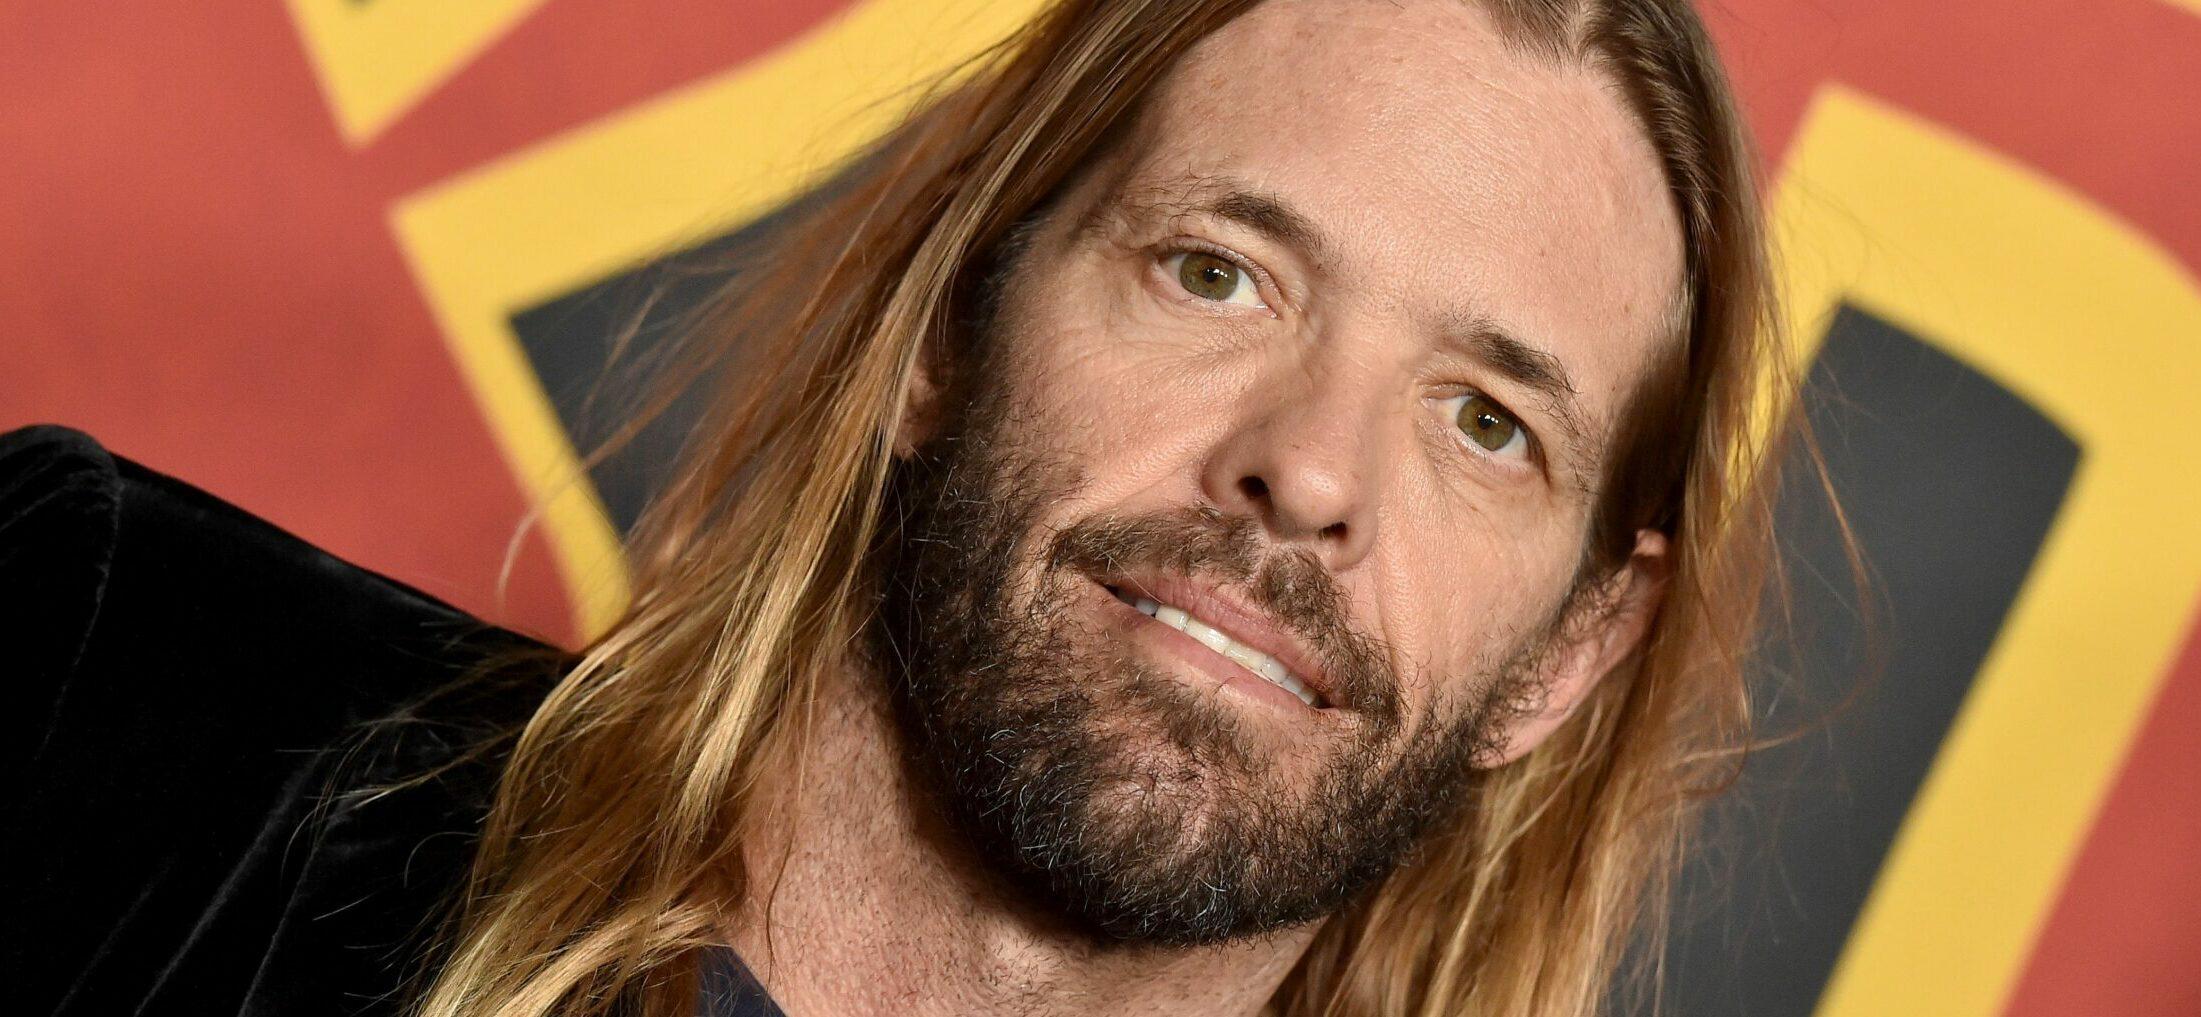 Taylor Hawkins death could be because of drugs